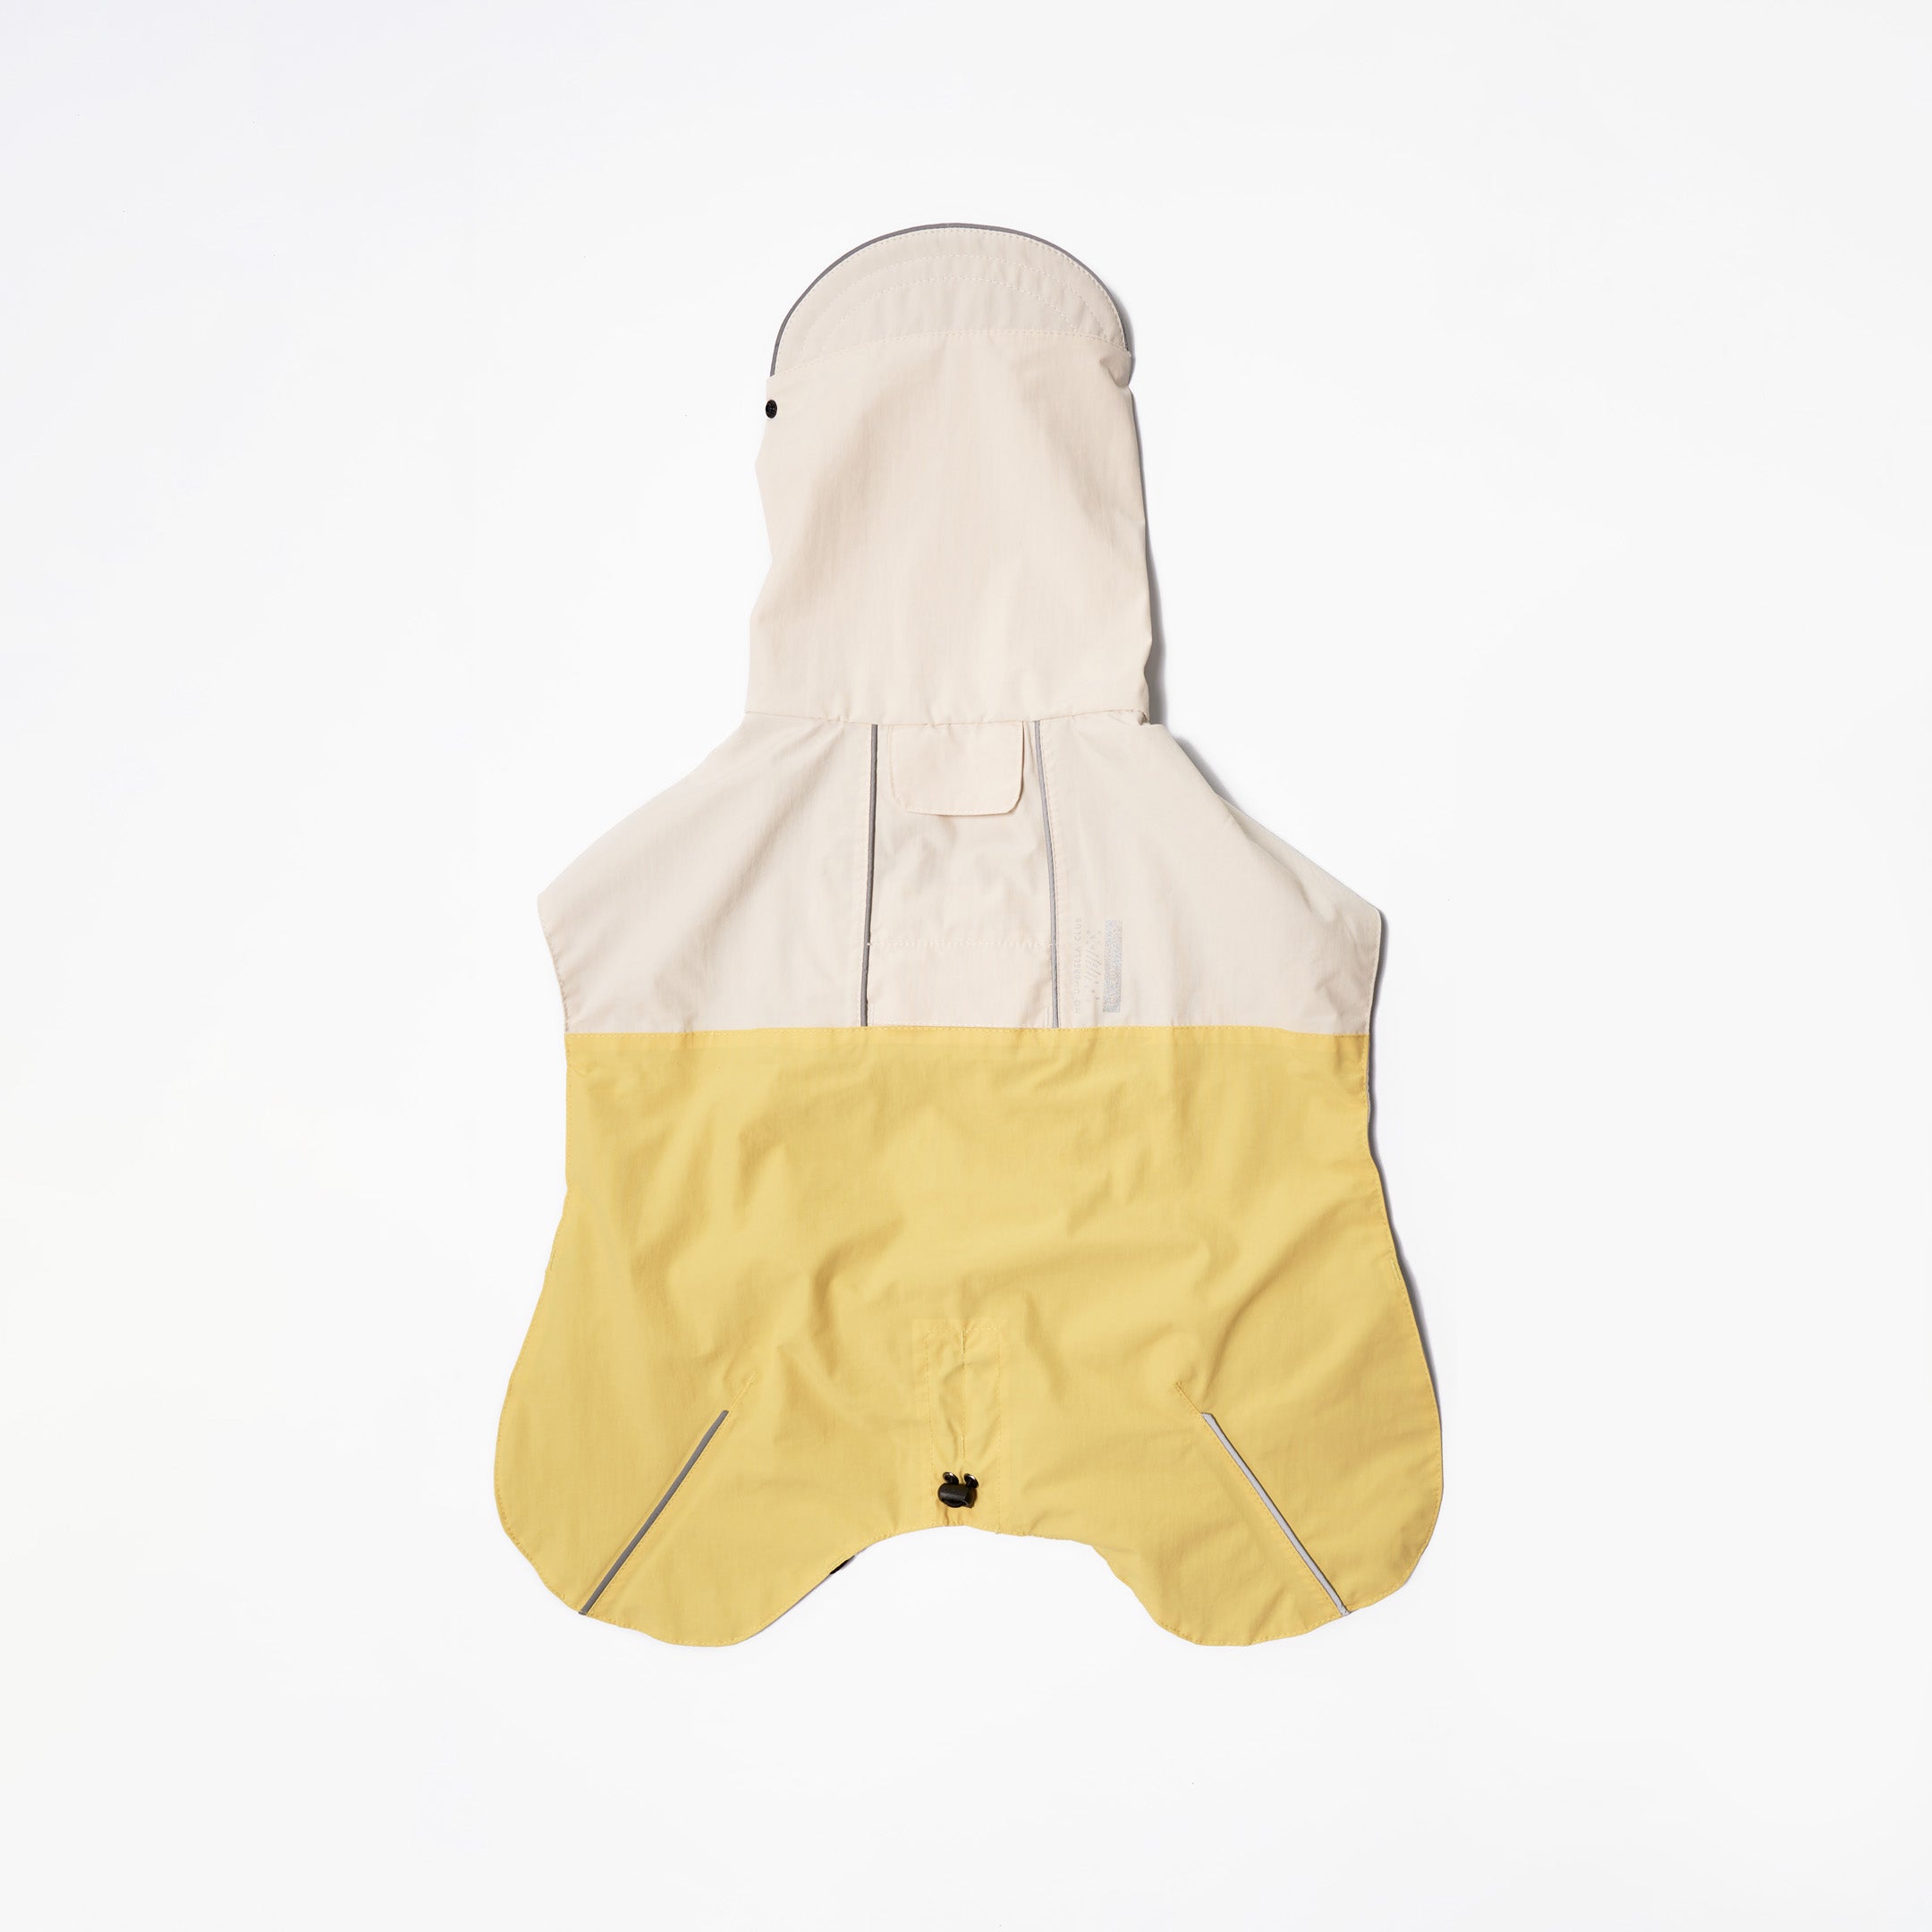 Cream and Yellow Dog Raincoat with Hood on White Background.